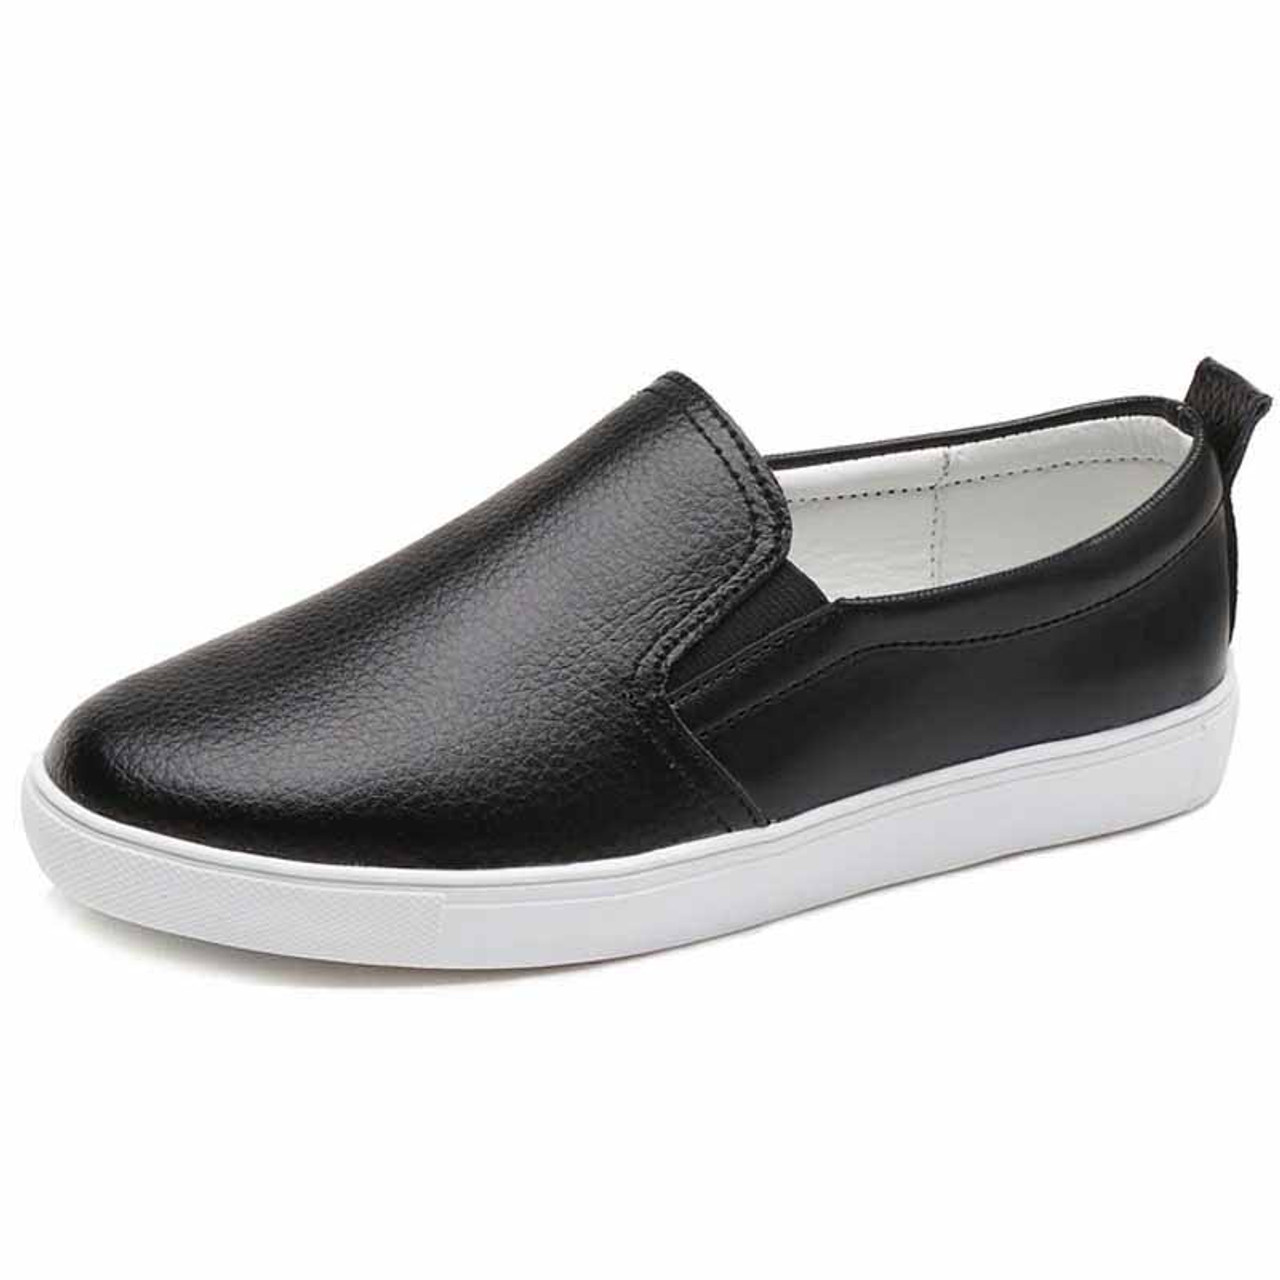 Black plain color casual on sneaker | Womens sneakers shoes online 1818WS